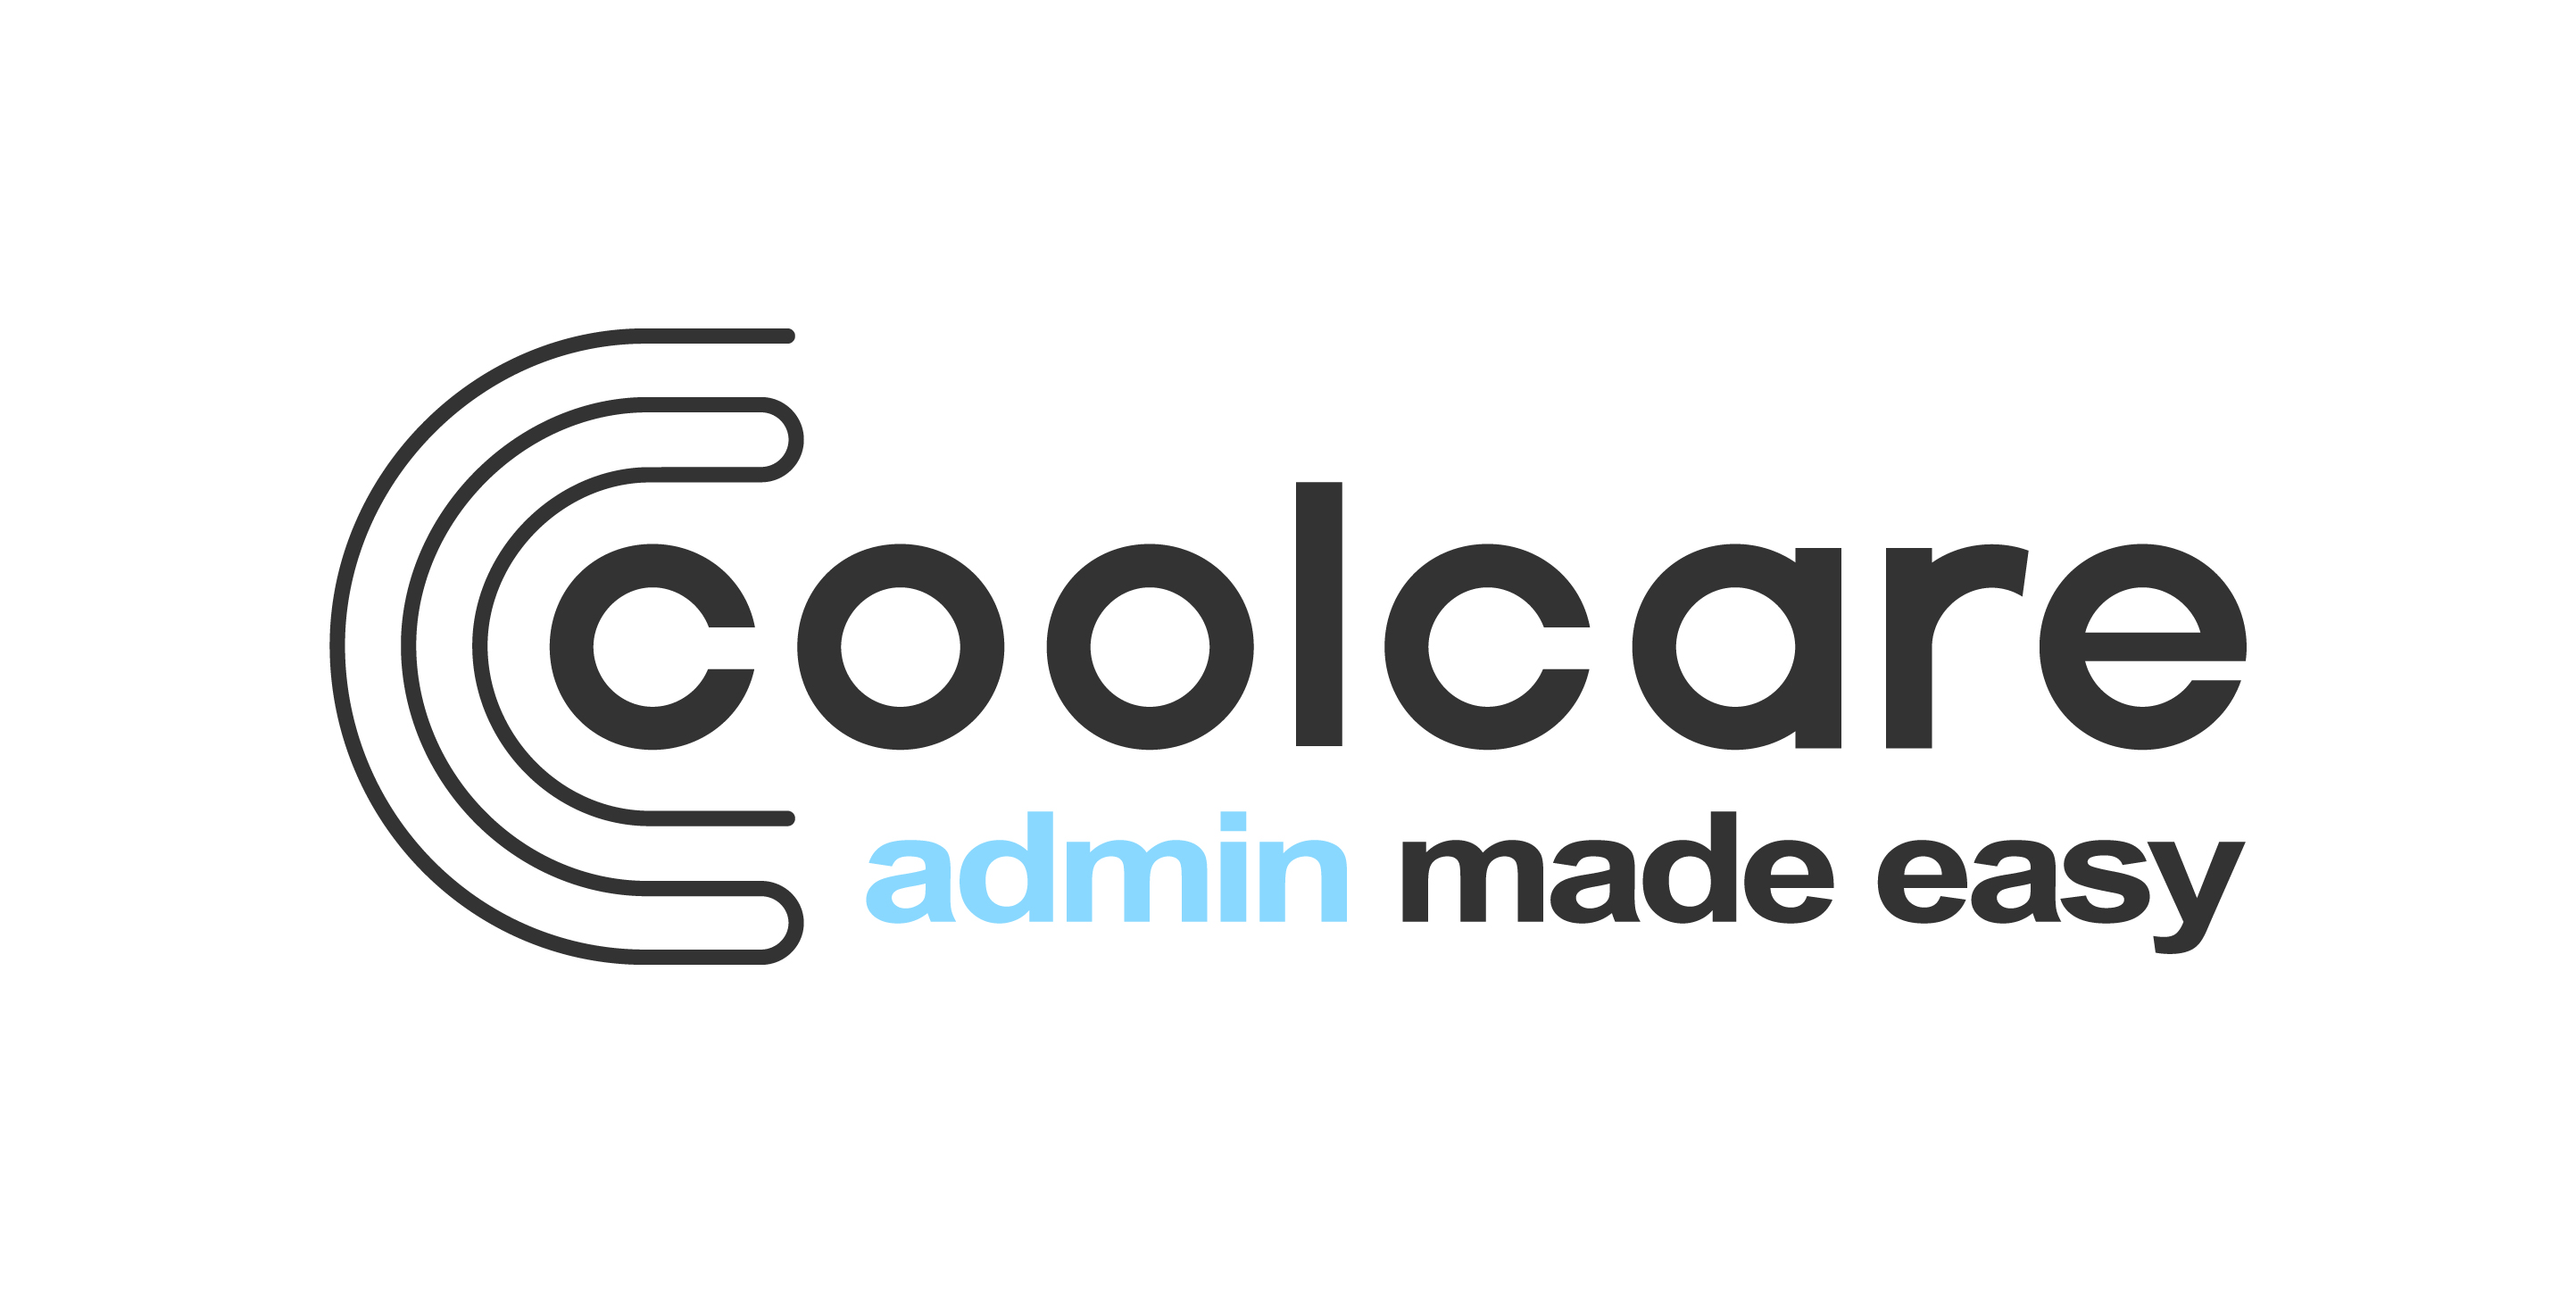 coolcare undergoes rebrand as it seeks to solidify its position as admin tech specialist.